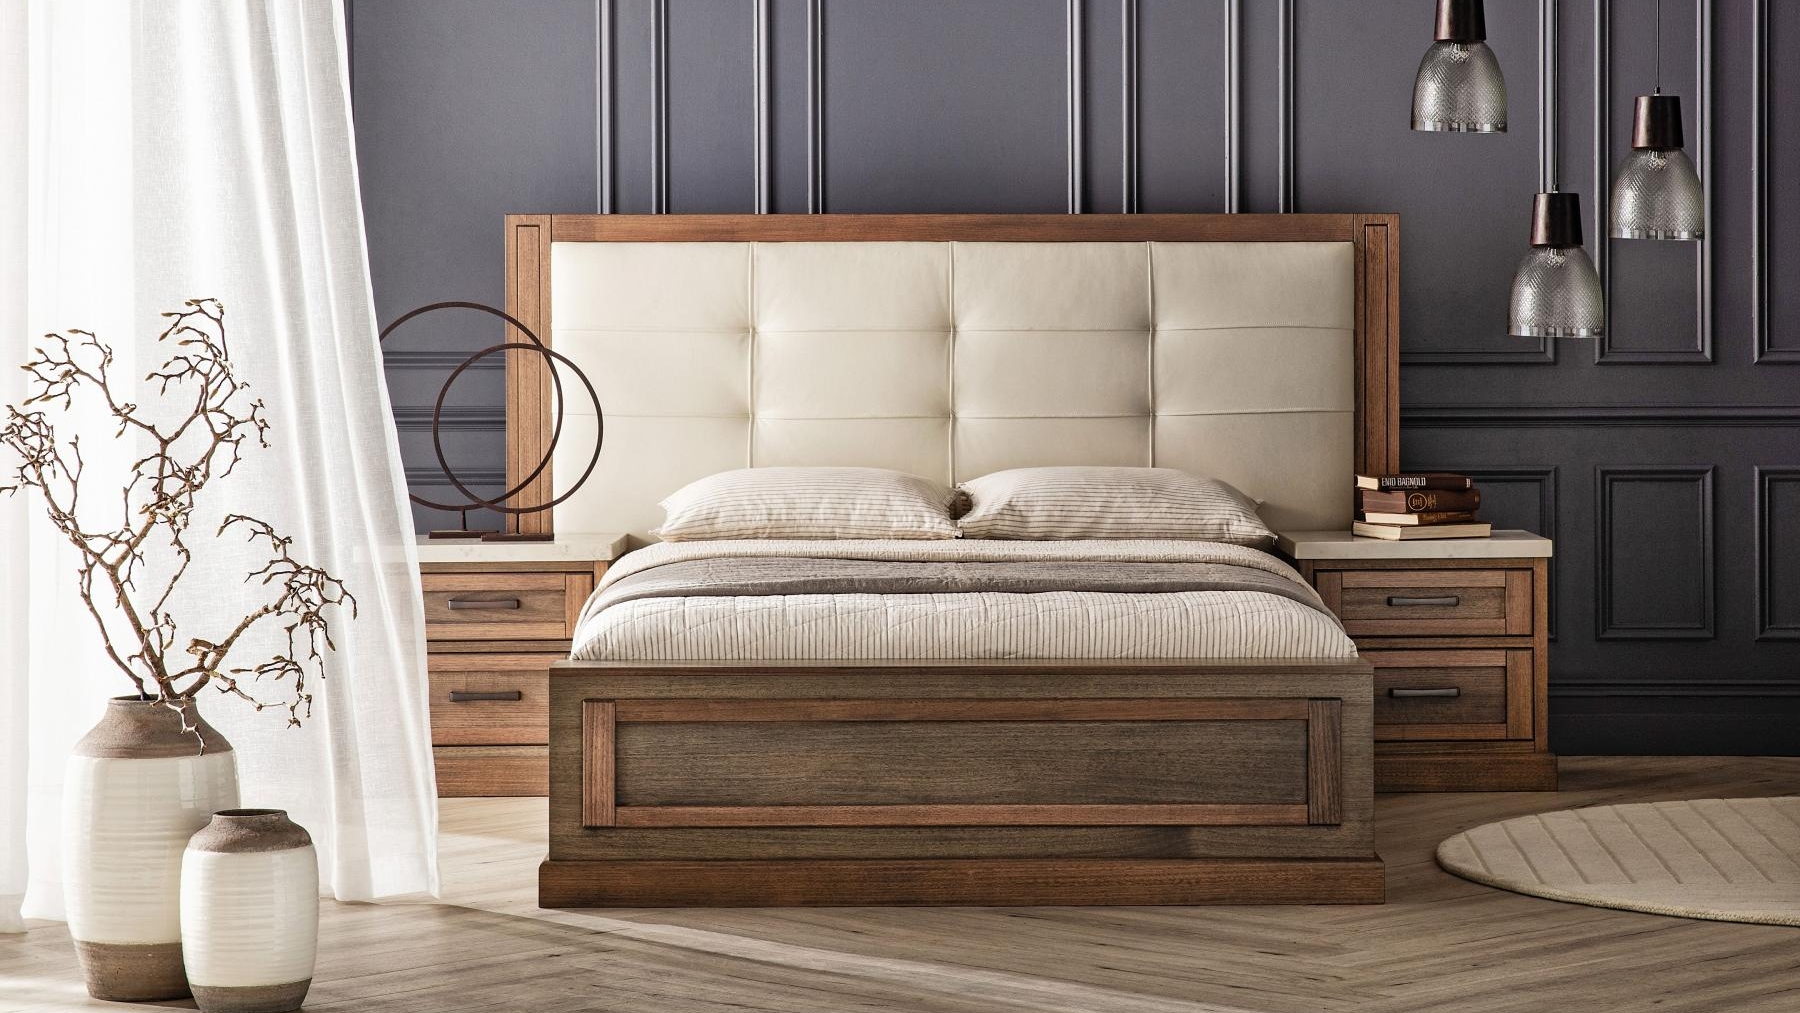 Hamptons Bed Frame With Bedhead, King Size Bed Suite Perth